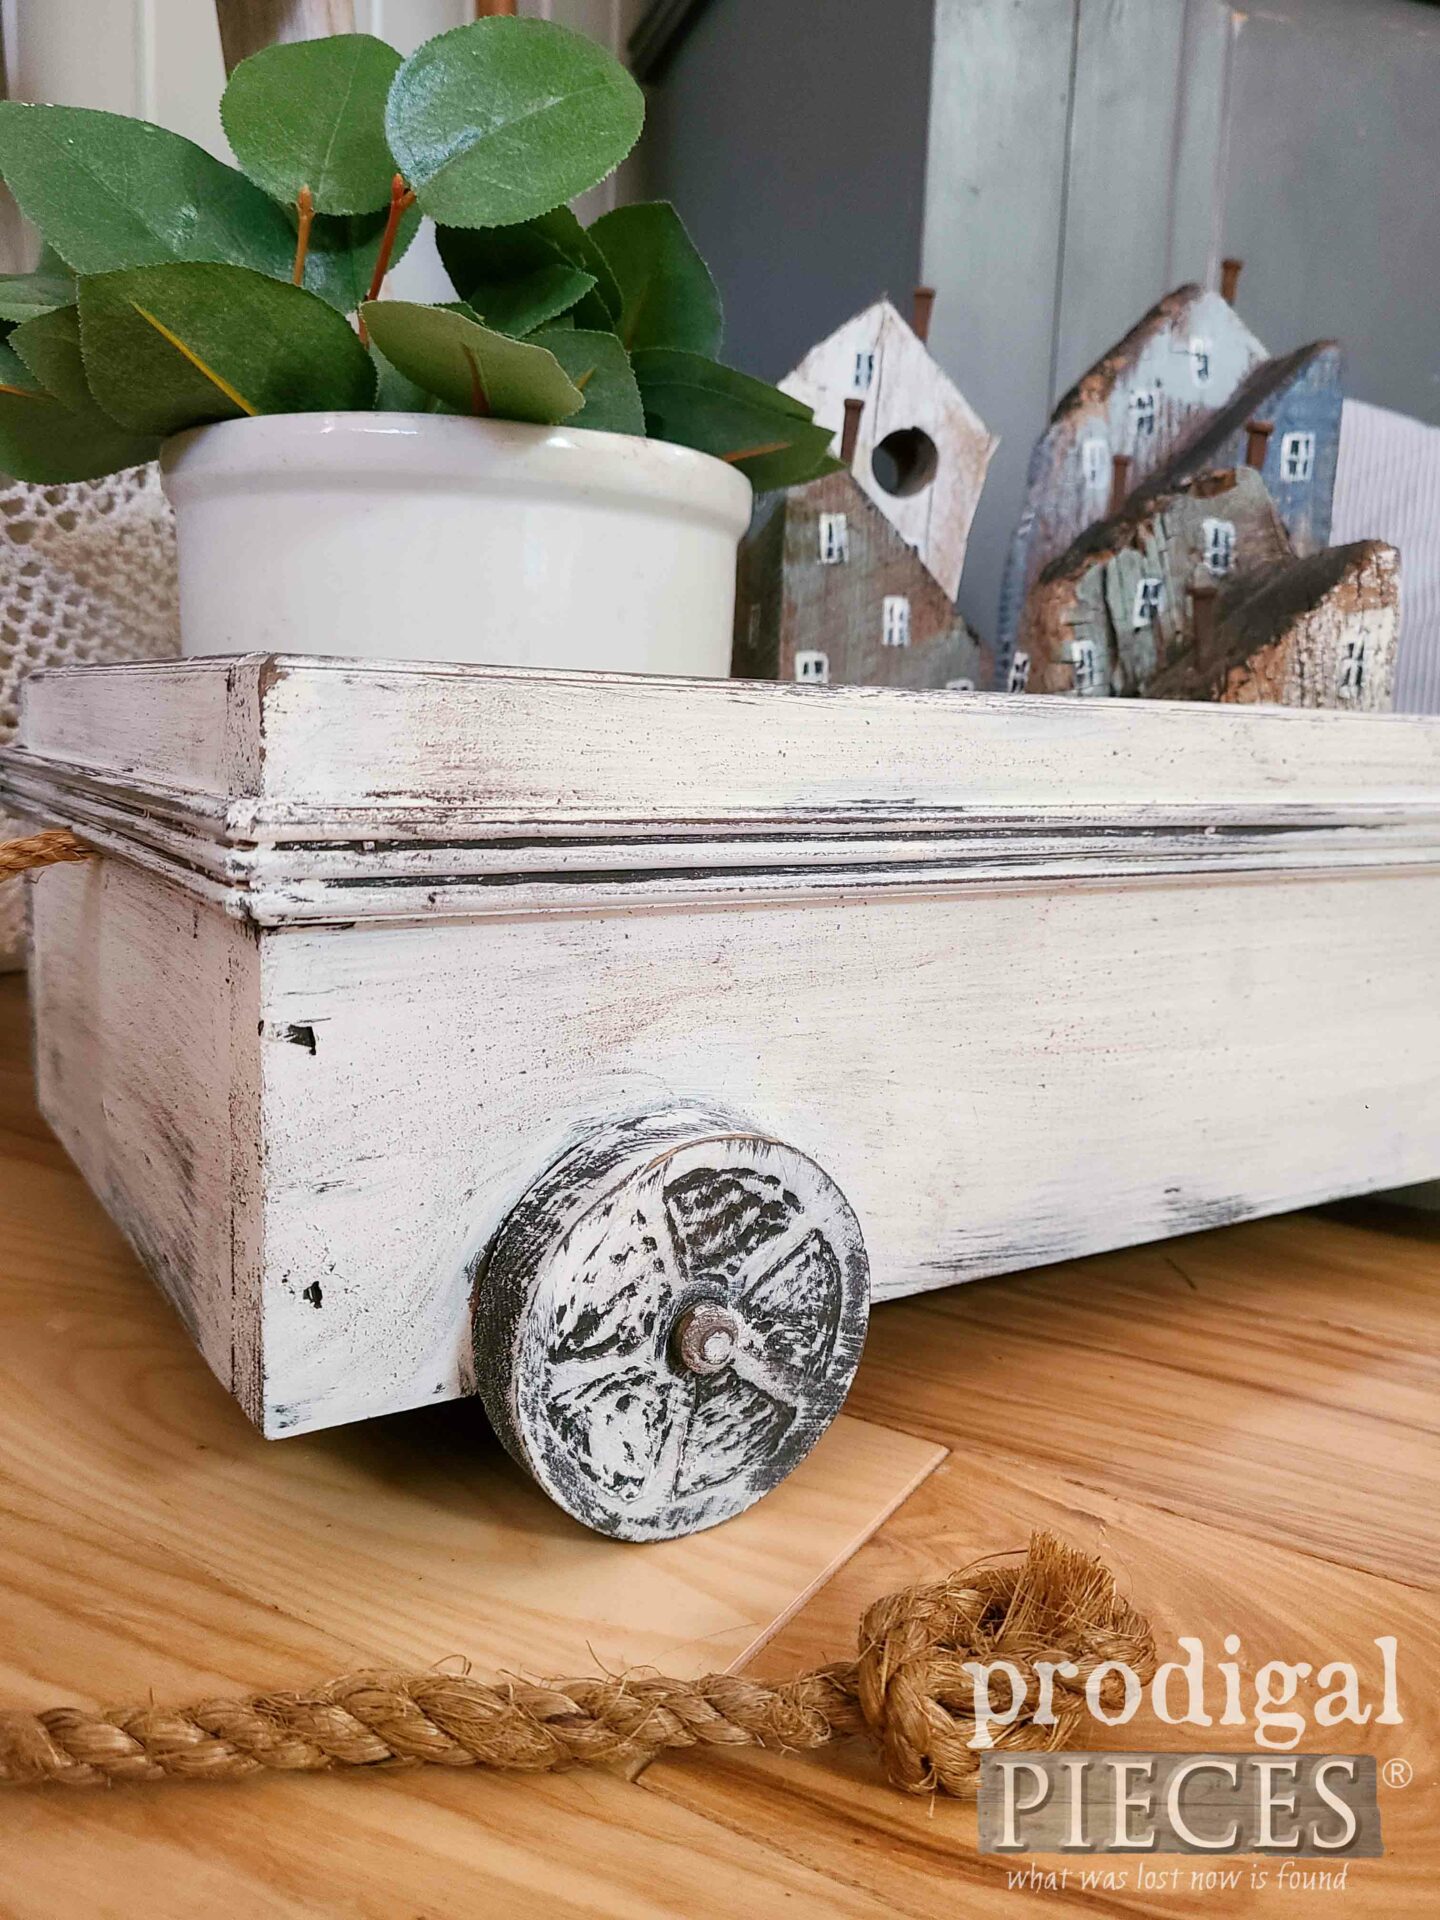 Handmade Wooden Wagon with Farmhouse Style by Larissa of Prodigal Pieces | prodigalpieces.com #prodigalpieces #handmade #homedecor #farmhouse